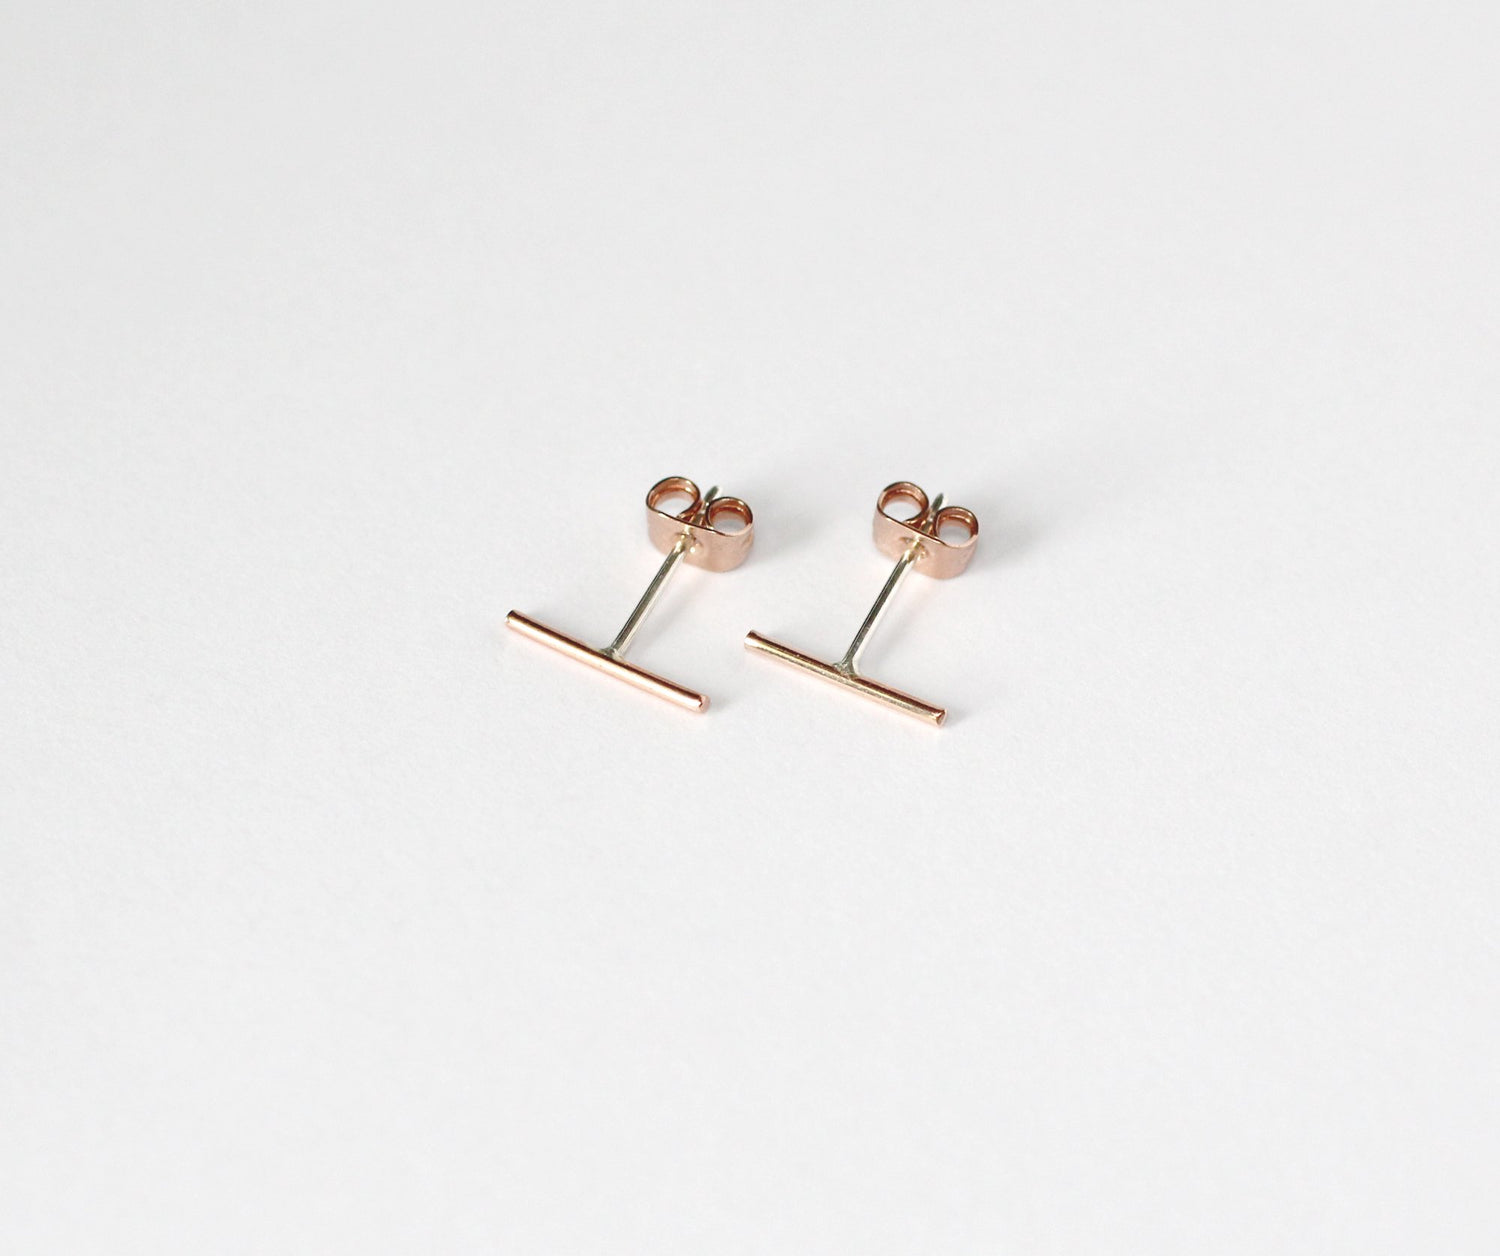 TUNDRA 9ct RED GOLD Earrings